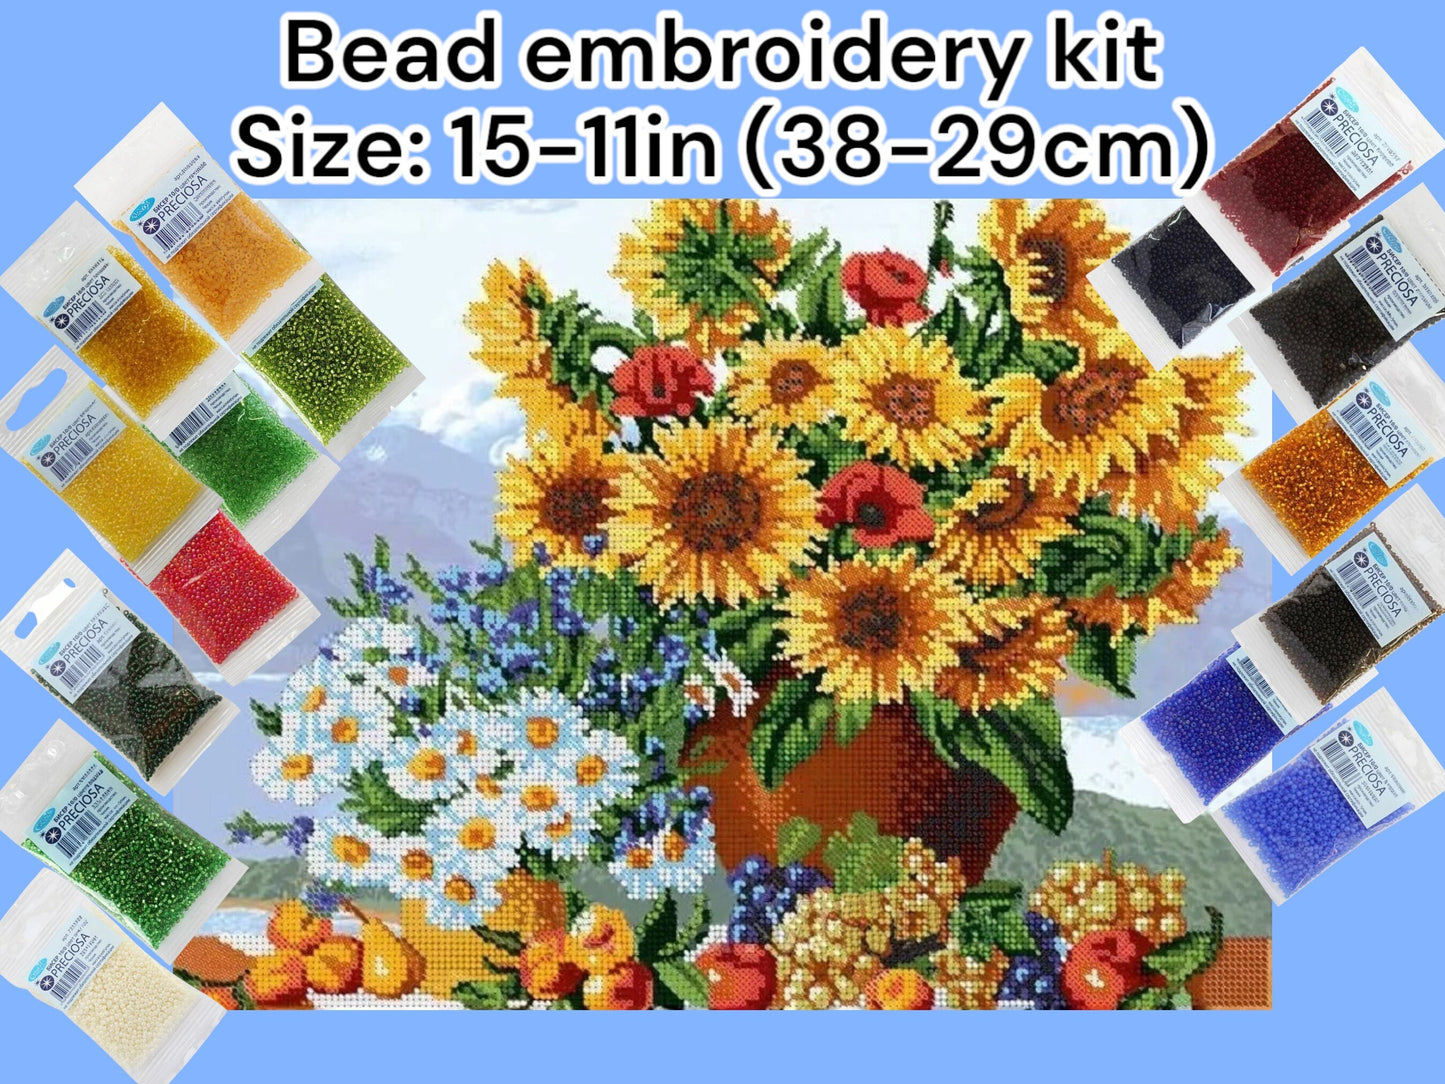 Sunflowers and Daisies DIY Bead Embroidery Kit - Create Your Own Floral Masterpiece! Size: 15-11in (38-29cm) - VadymShop